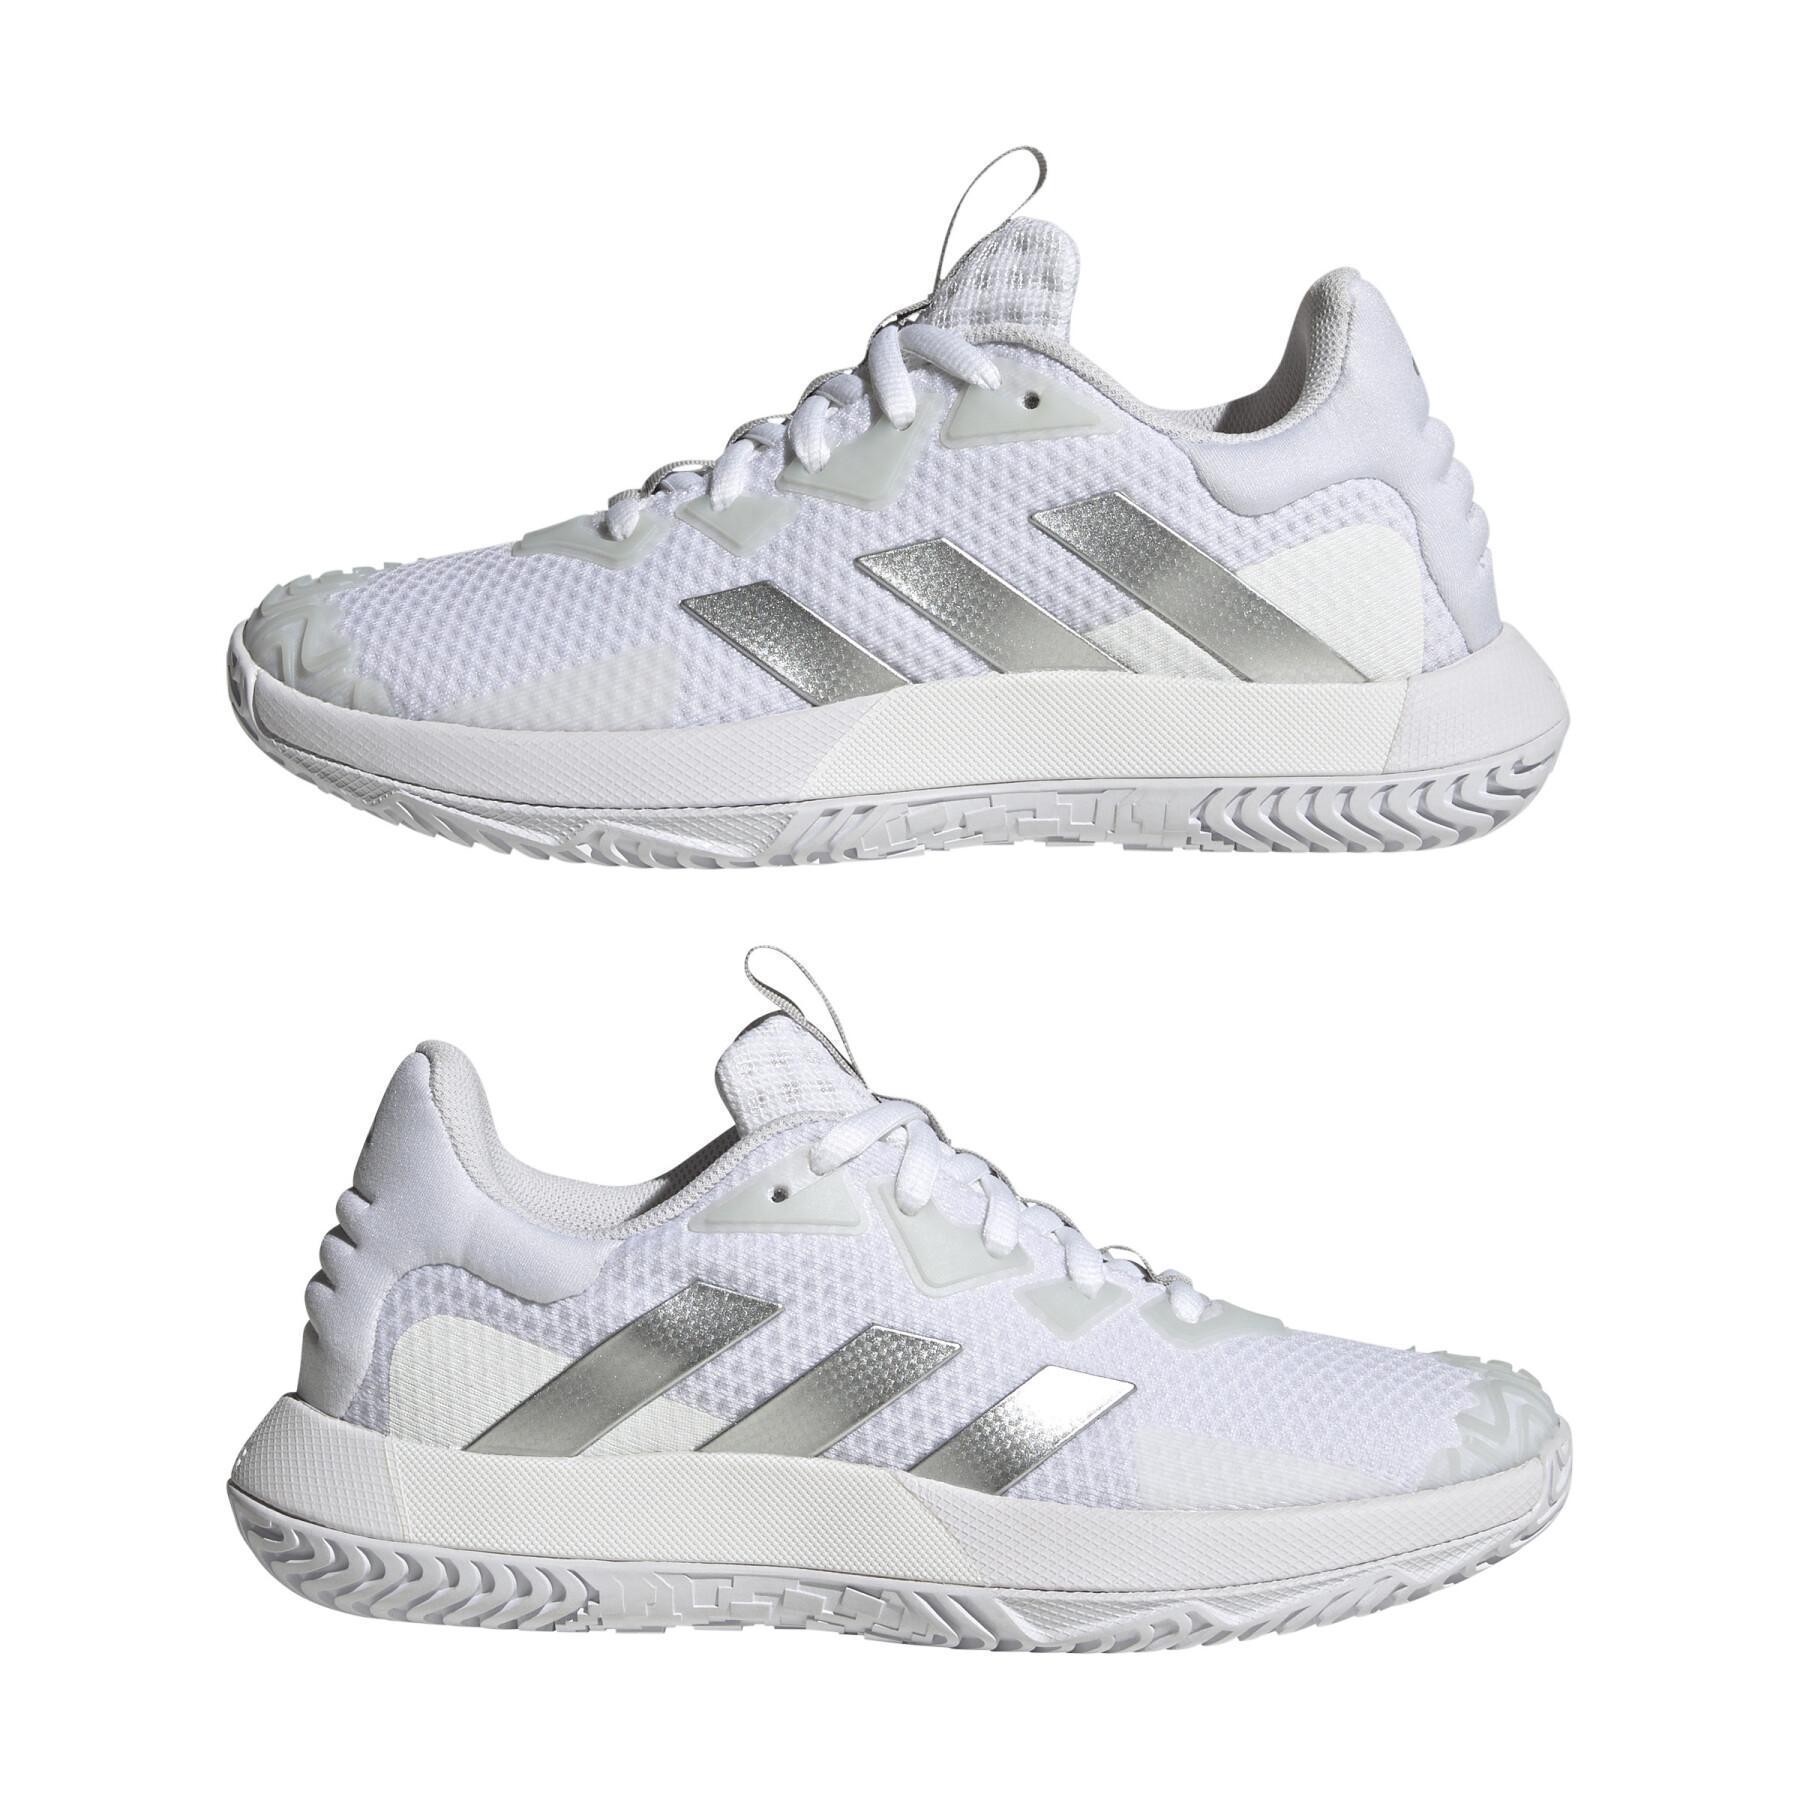 Women's tennis shoes adidas SoleMatch Control